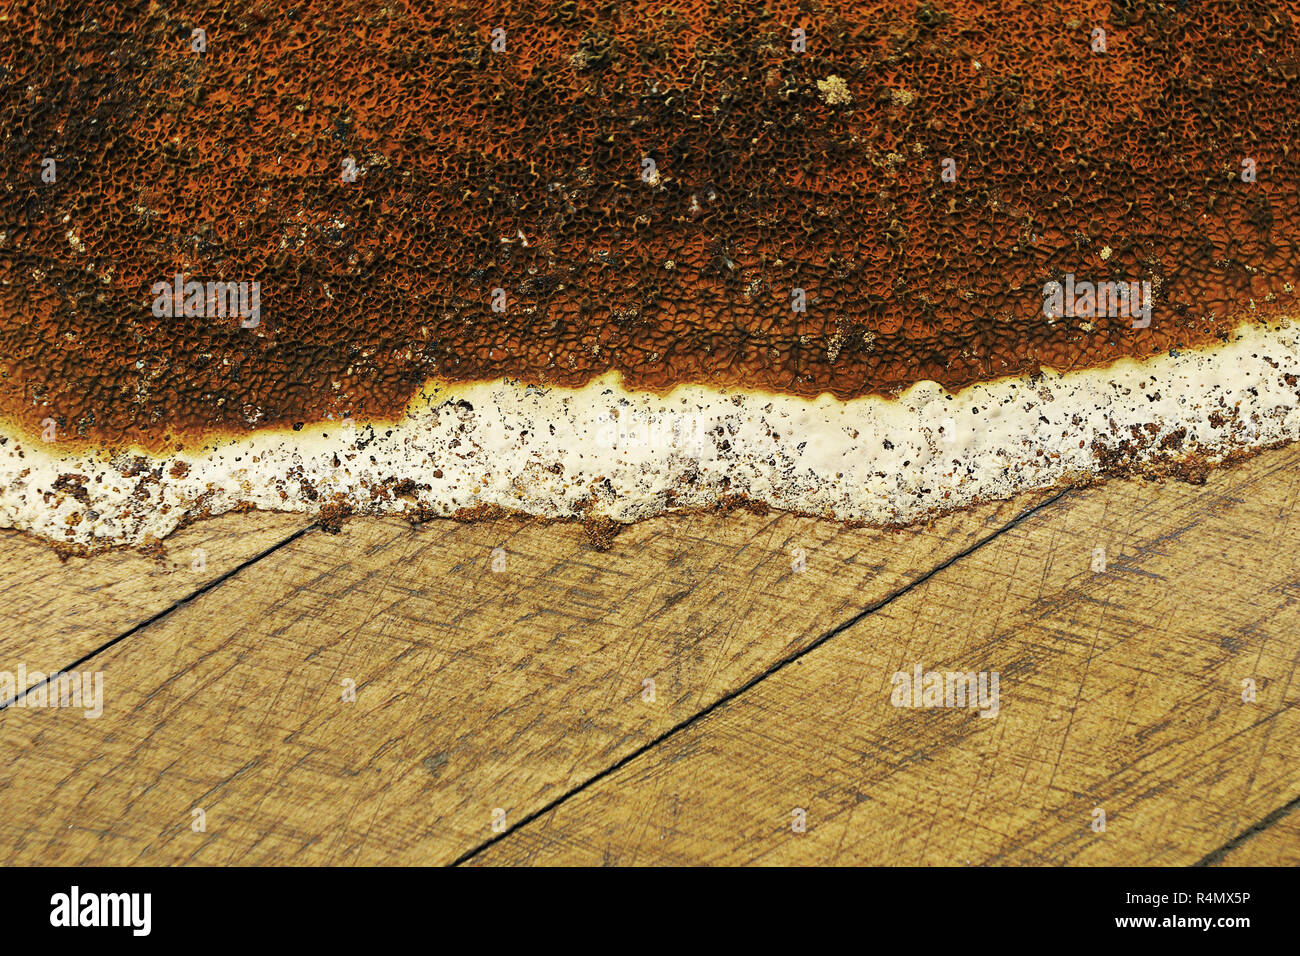 closeup of Serpula lacrymans fruiting body growing on wooden parquet; this species of fungus is the most damaging in damp buildings Stock Photo